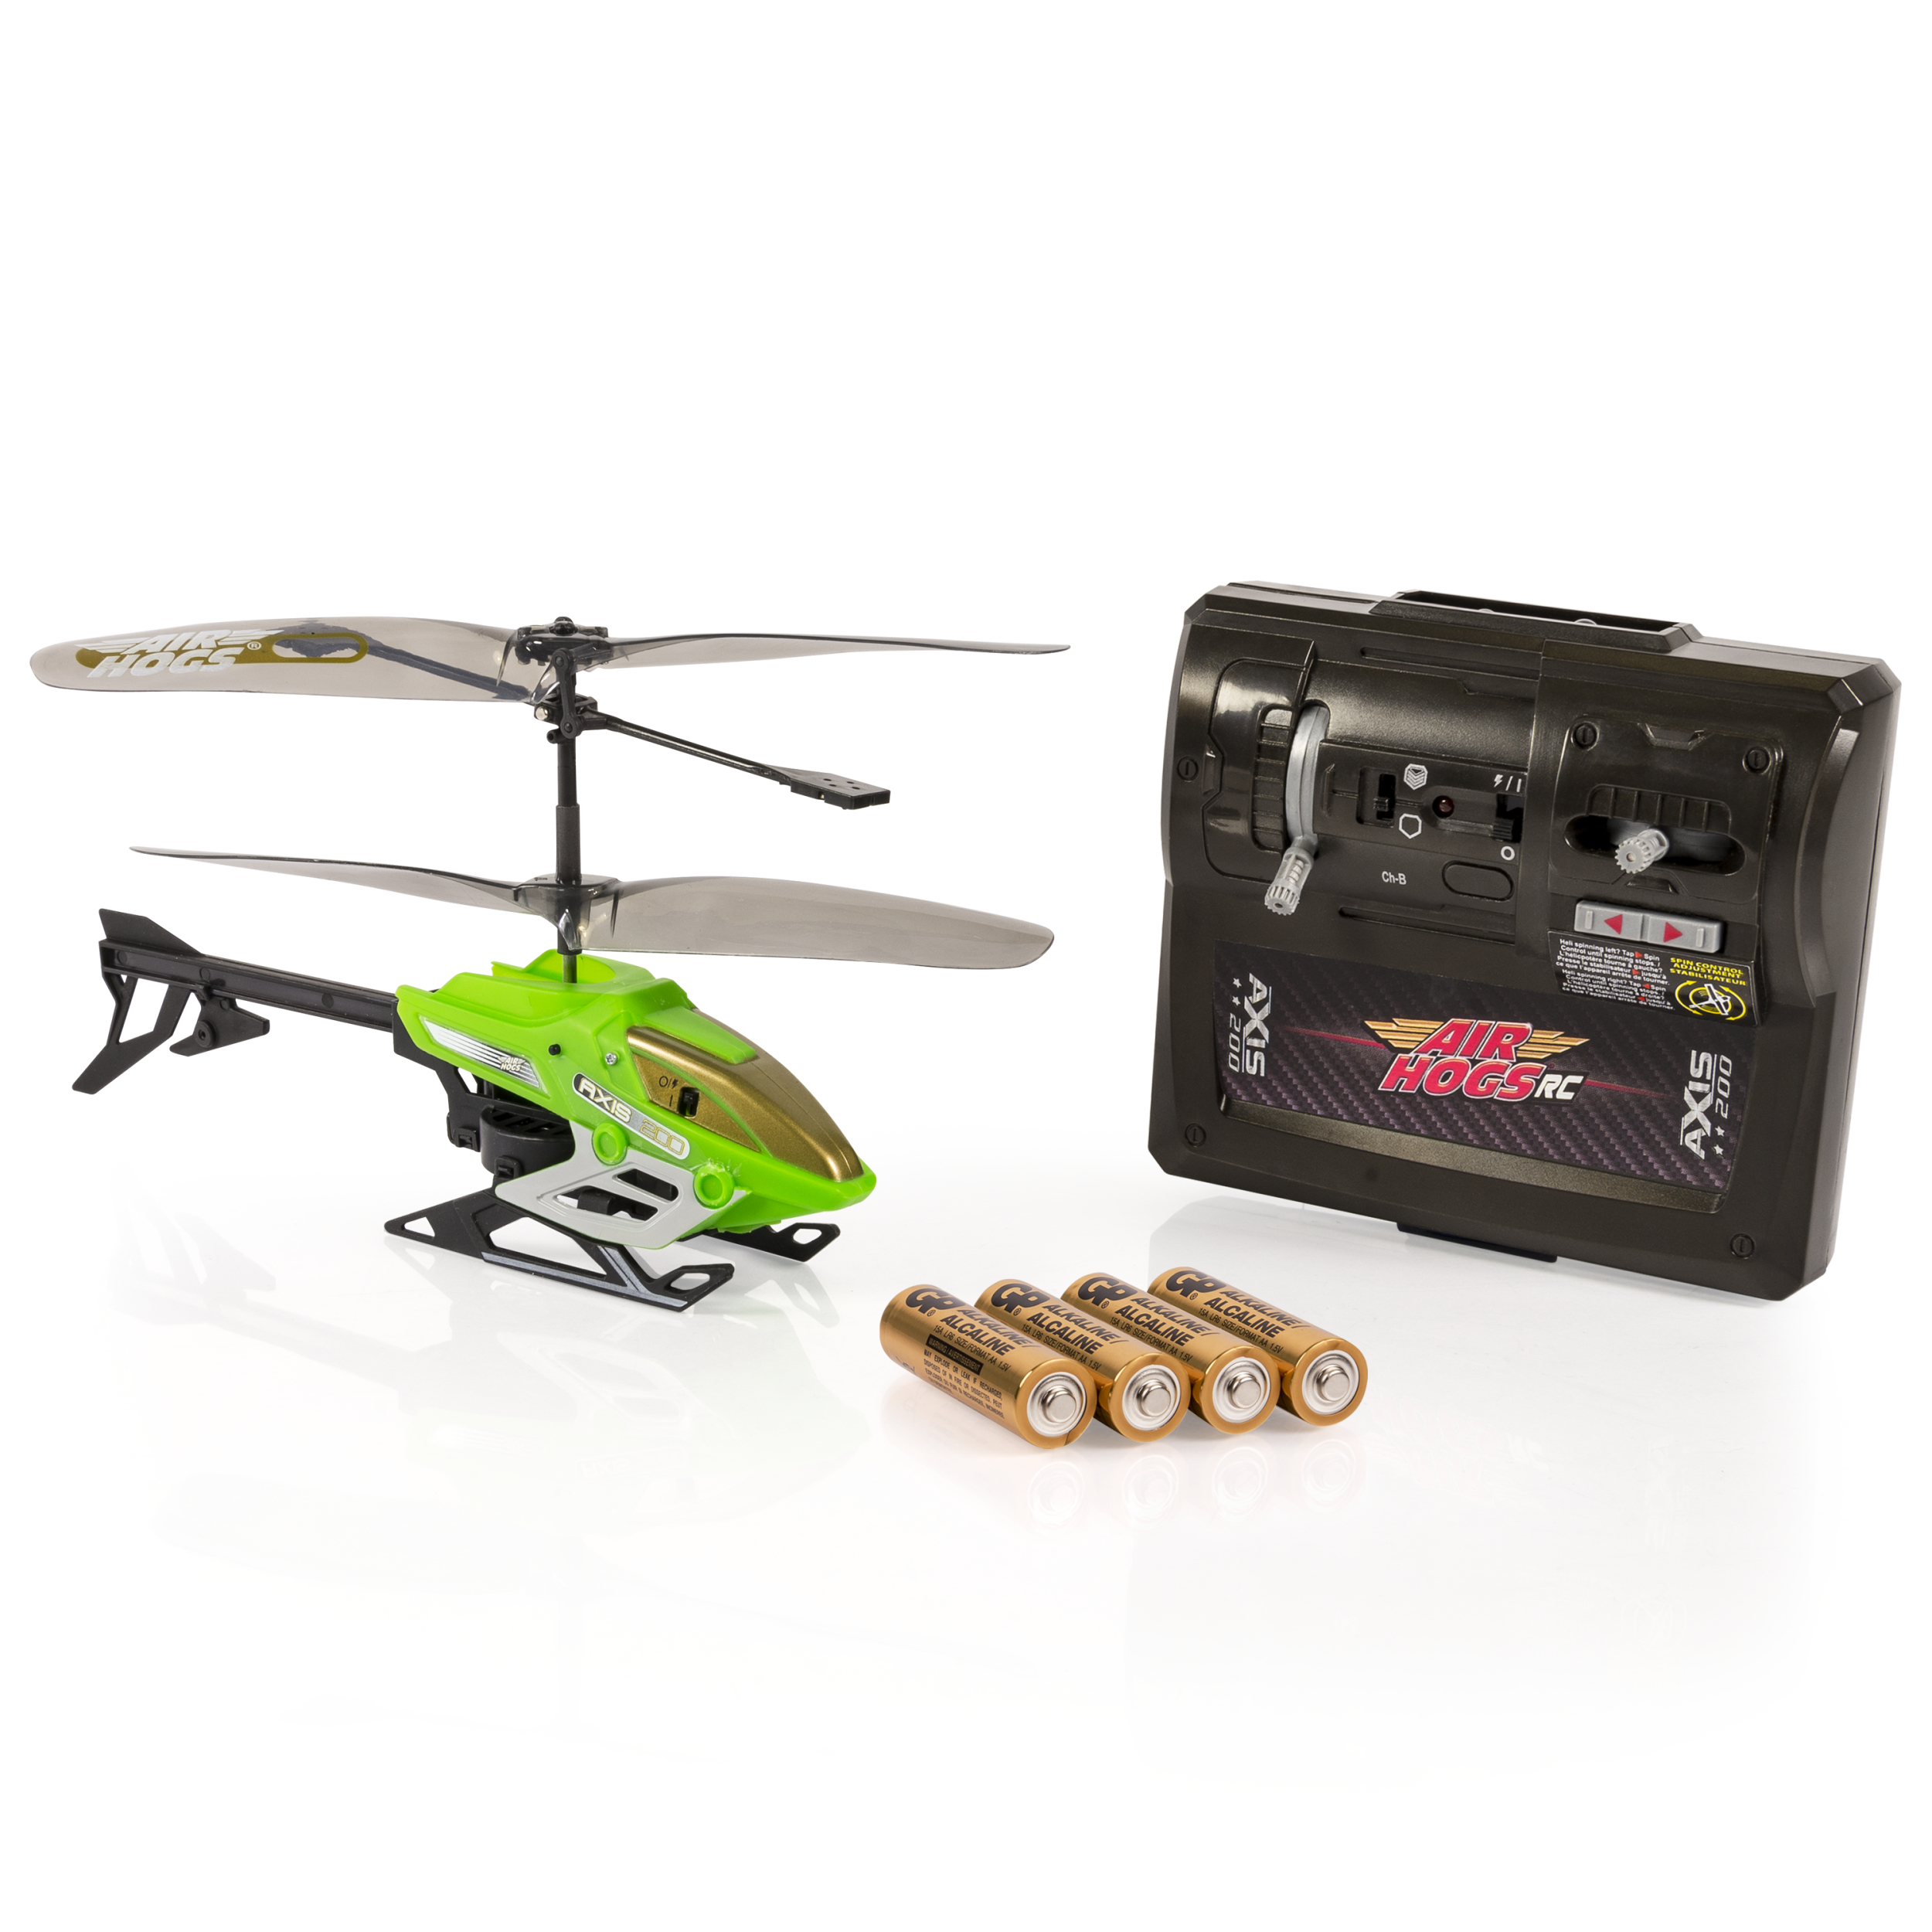 Air Hogs Axis 200 R/C Helicopter with Batteries, Green - image 1 of 6